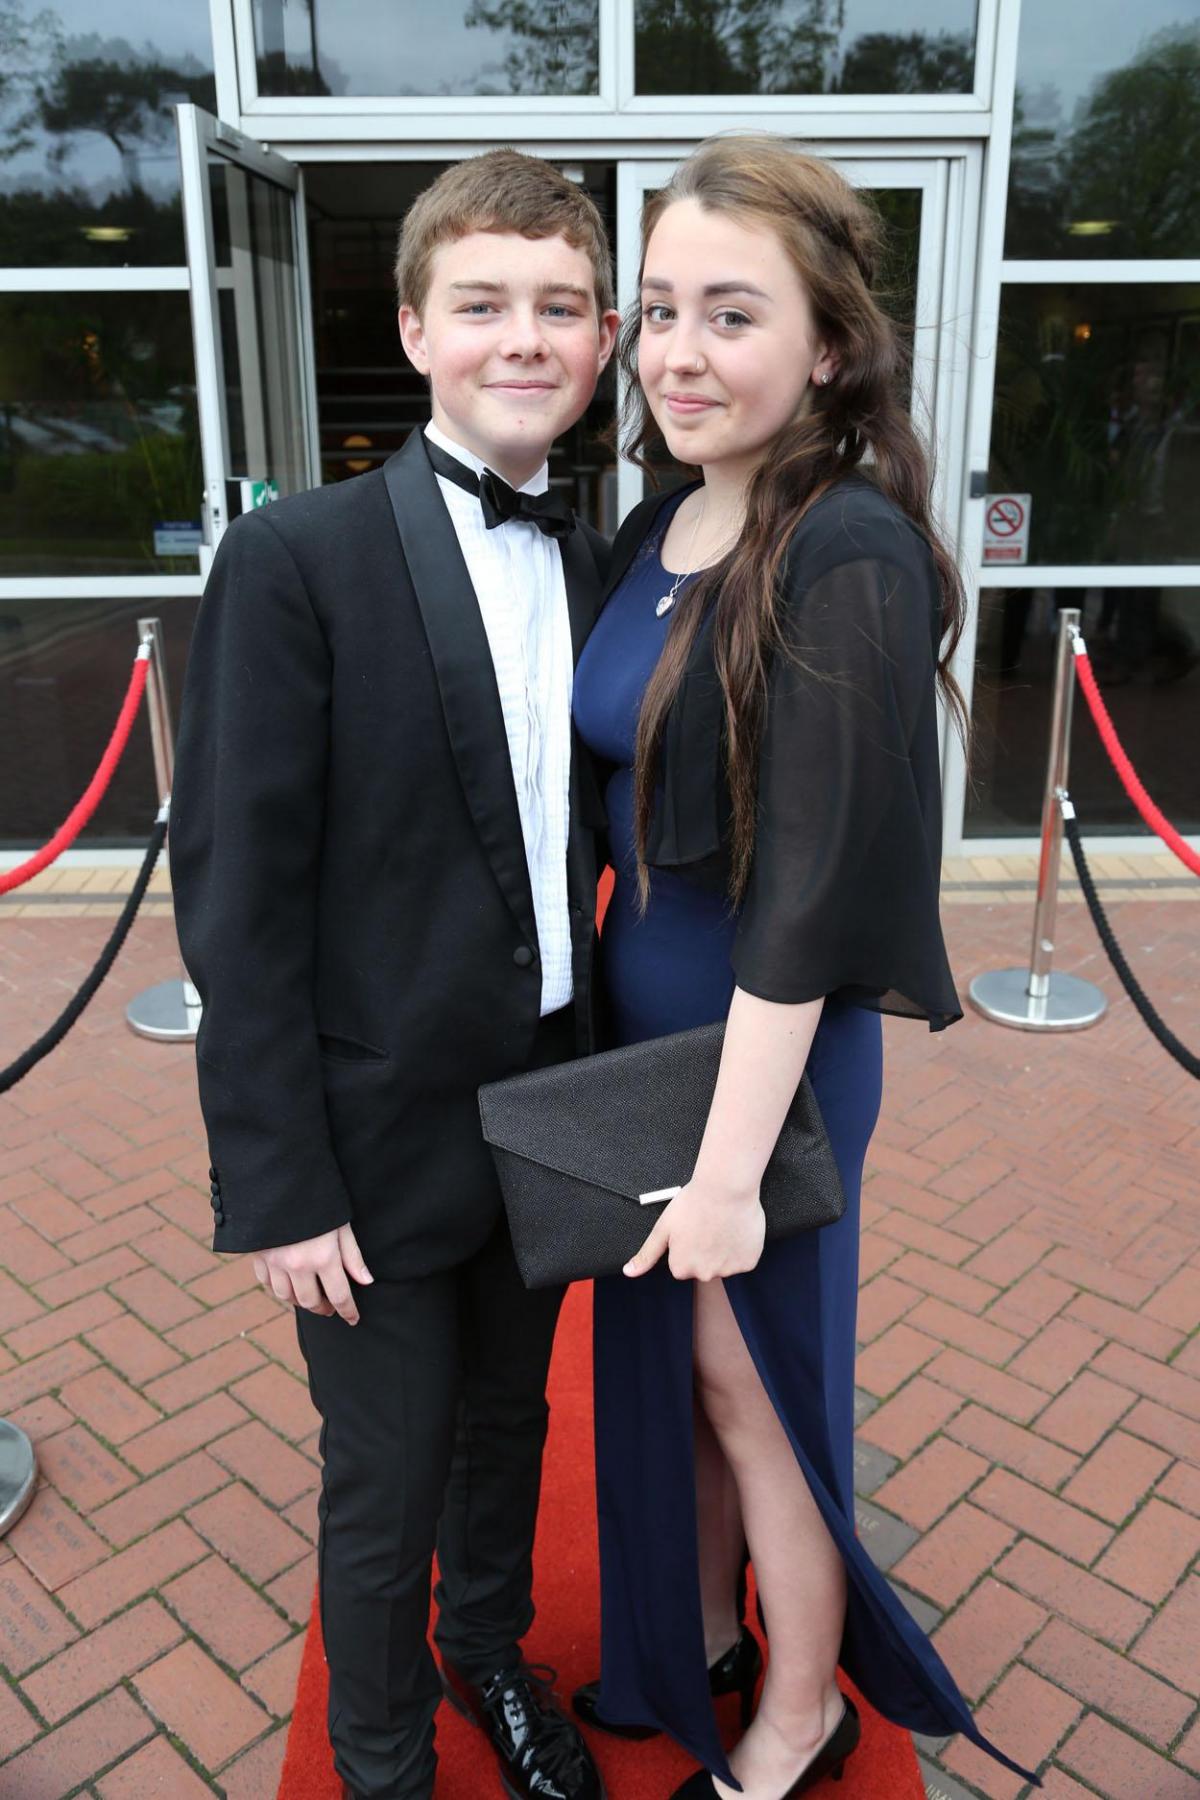 Bournemouth Collegiate School Years 11, 12 and 13 prom at the Goldsands stadium on 22 May, 2015. 